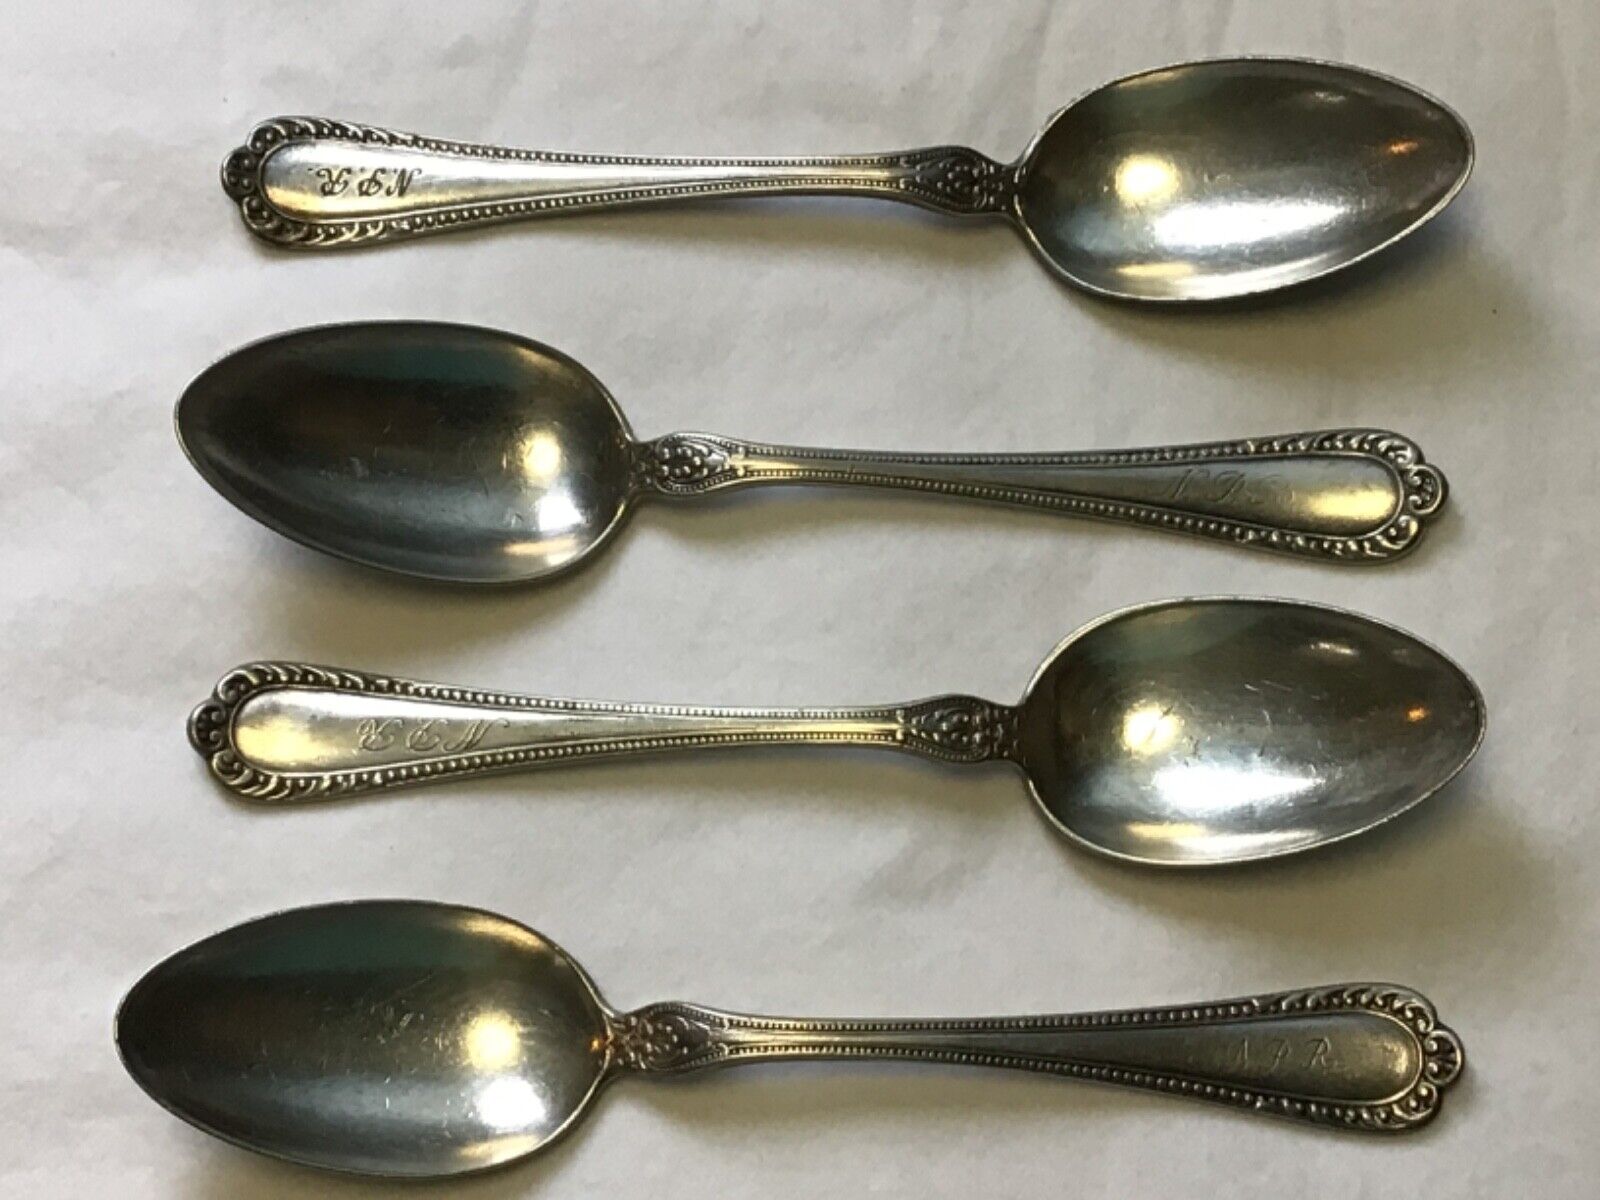 NORTHERN PACIFIC RAILROAD LOT OF 4 SPOONS GORHAM 1896